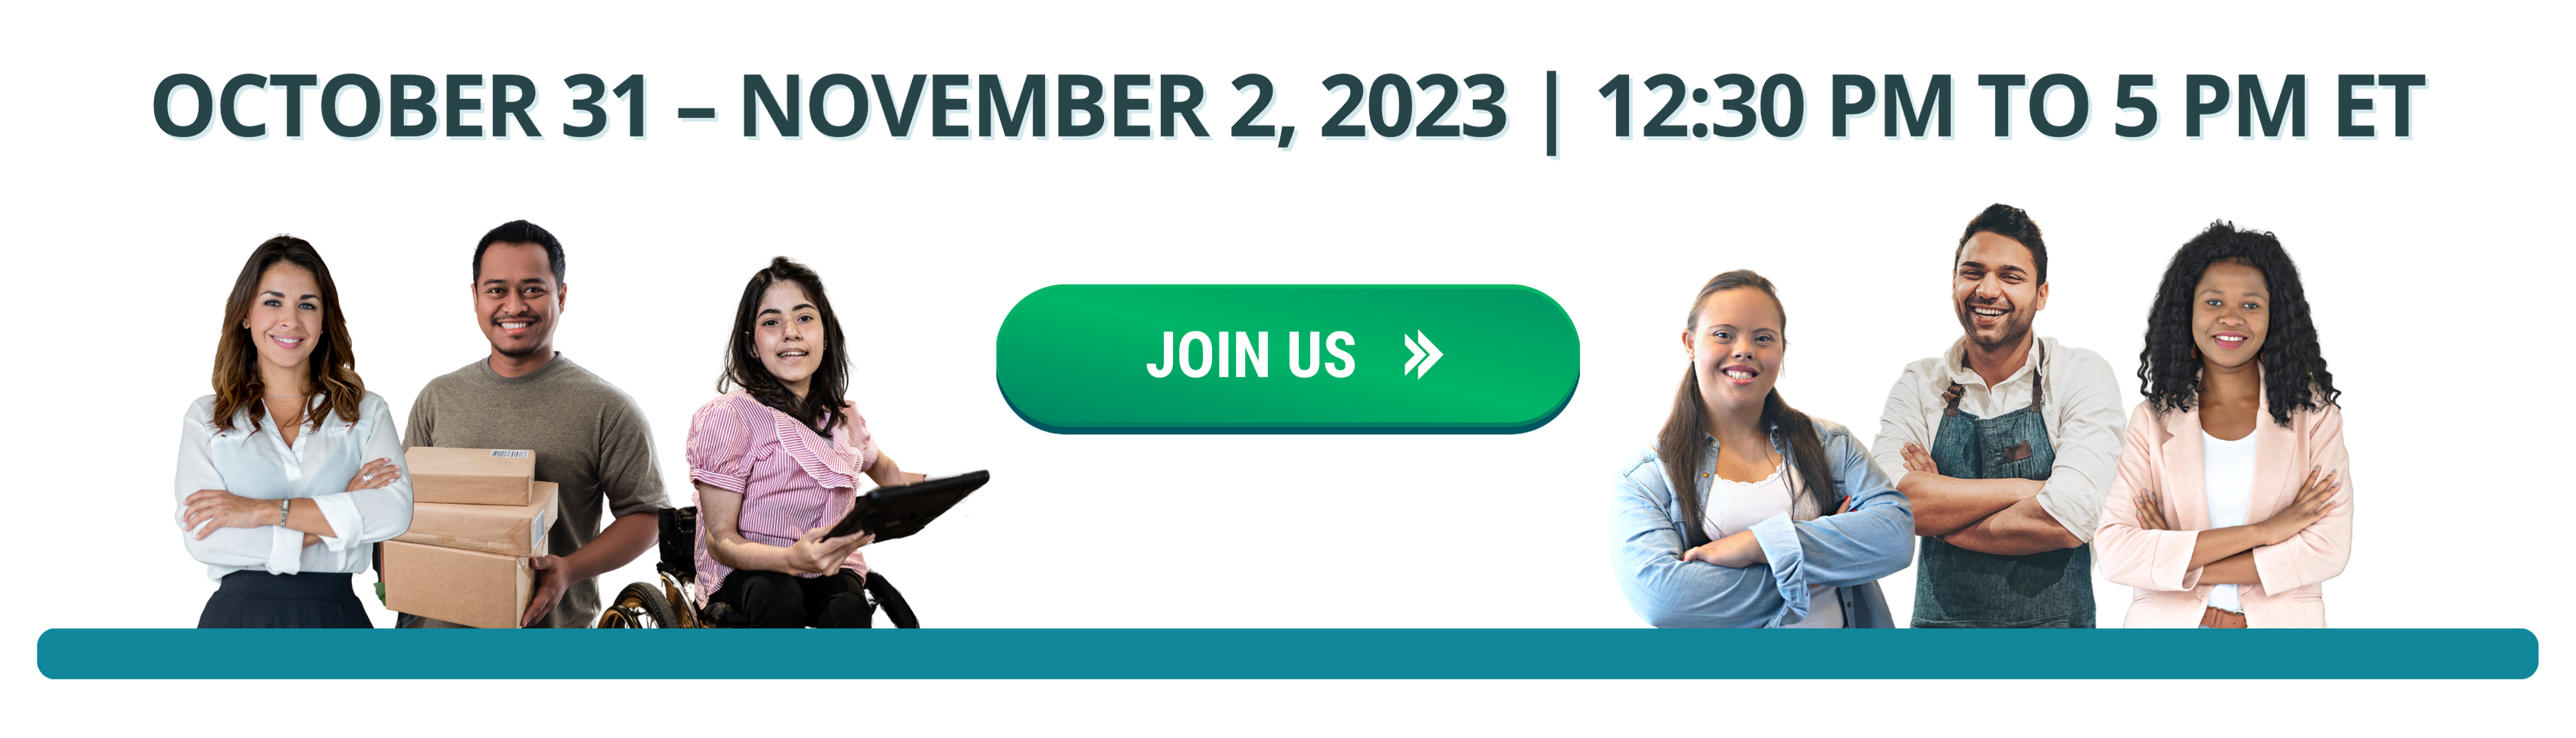 Register for the 2023 Disability Owned Convening: October 31 - November 2, 2023 | 12.30 PM to 5 PM ET